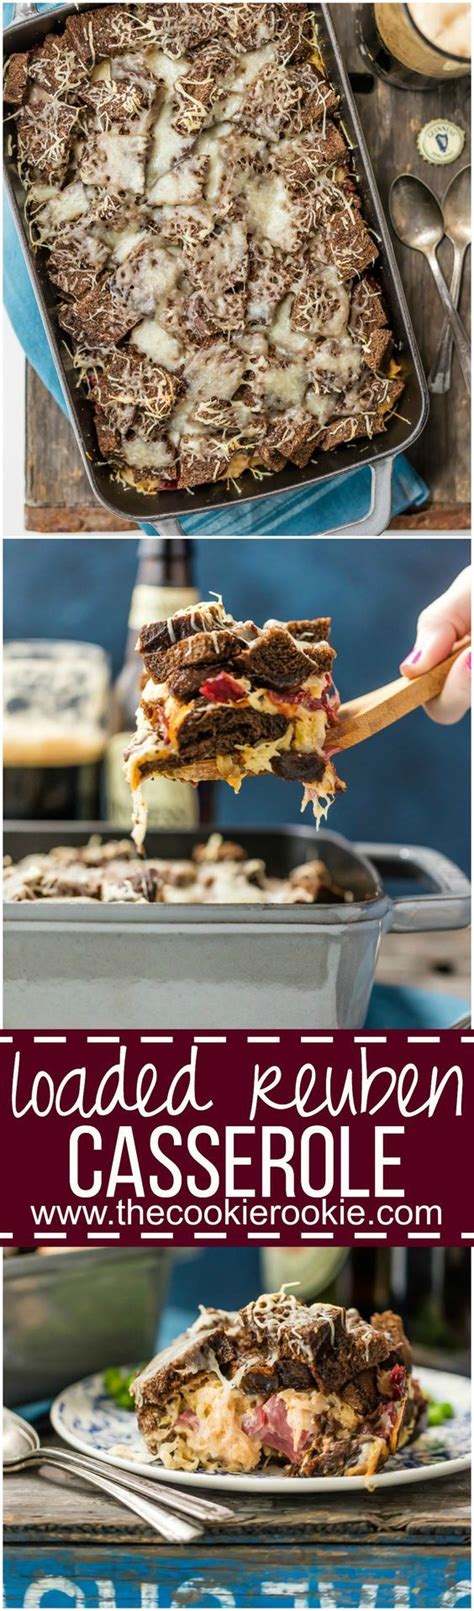 Make a leftover corned beef sandwich with a slice of brisket and a wedge of cabbage on rye. We LOVE this Loaded Reuben Casserole every St. Patrick's Day! Such an easy comfort food recipe ...